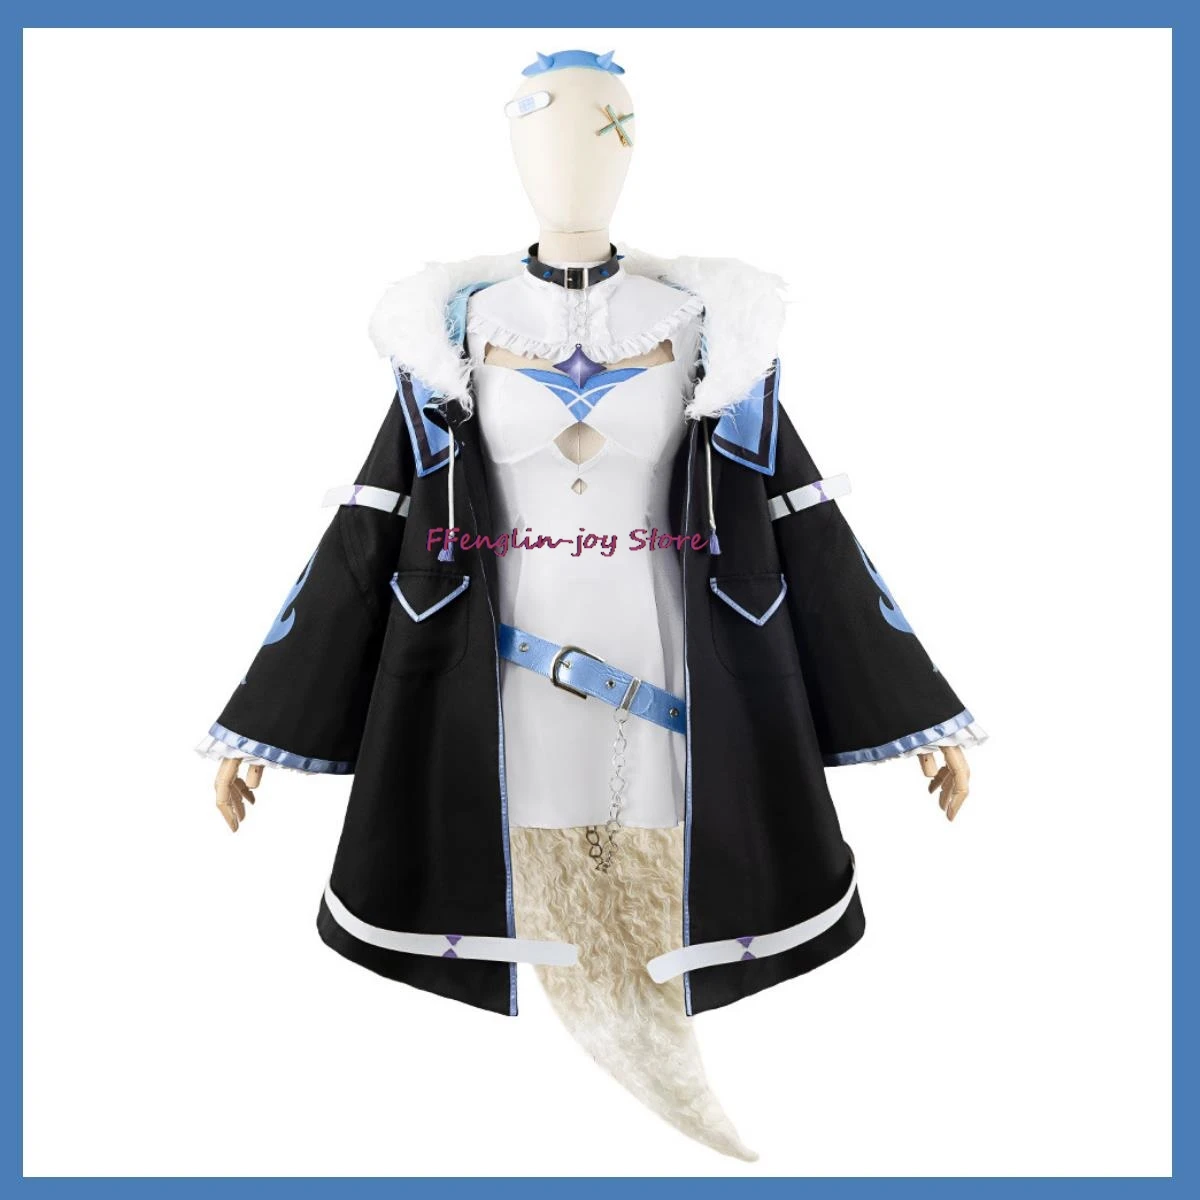 

Anime Vtuber Abyssgard Fuwawa Cosplay Costume Hololive EN Advent 3rd Generation Fuwamoco Wig Uniform Boots Woman Sexy Party Suit